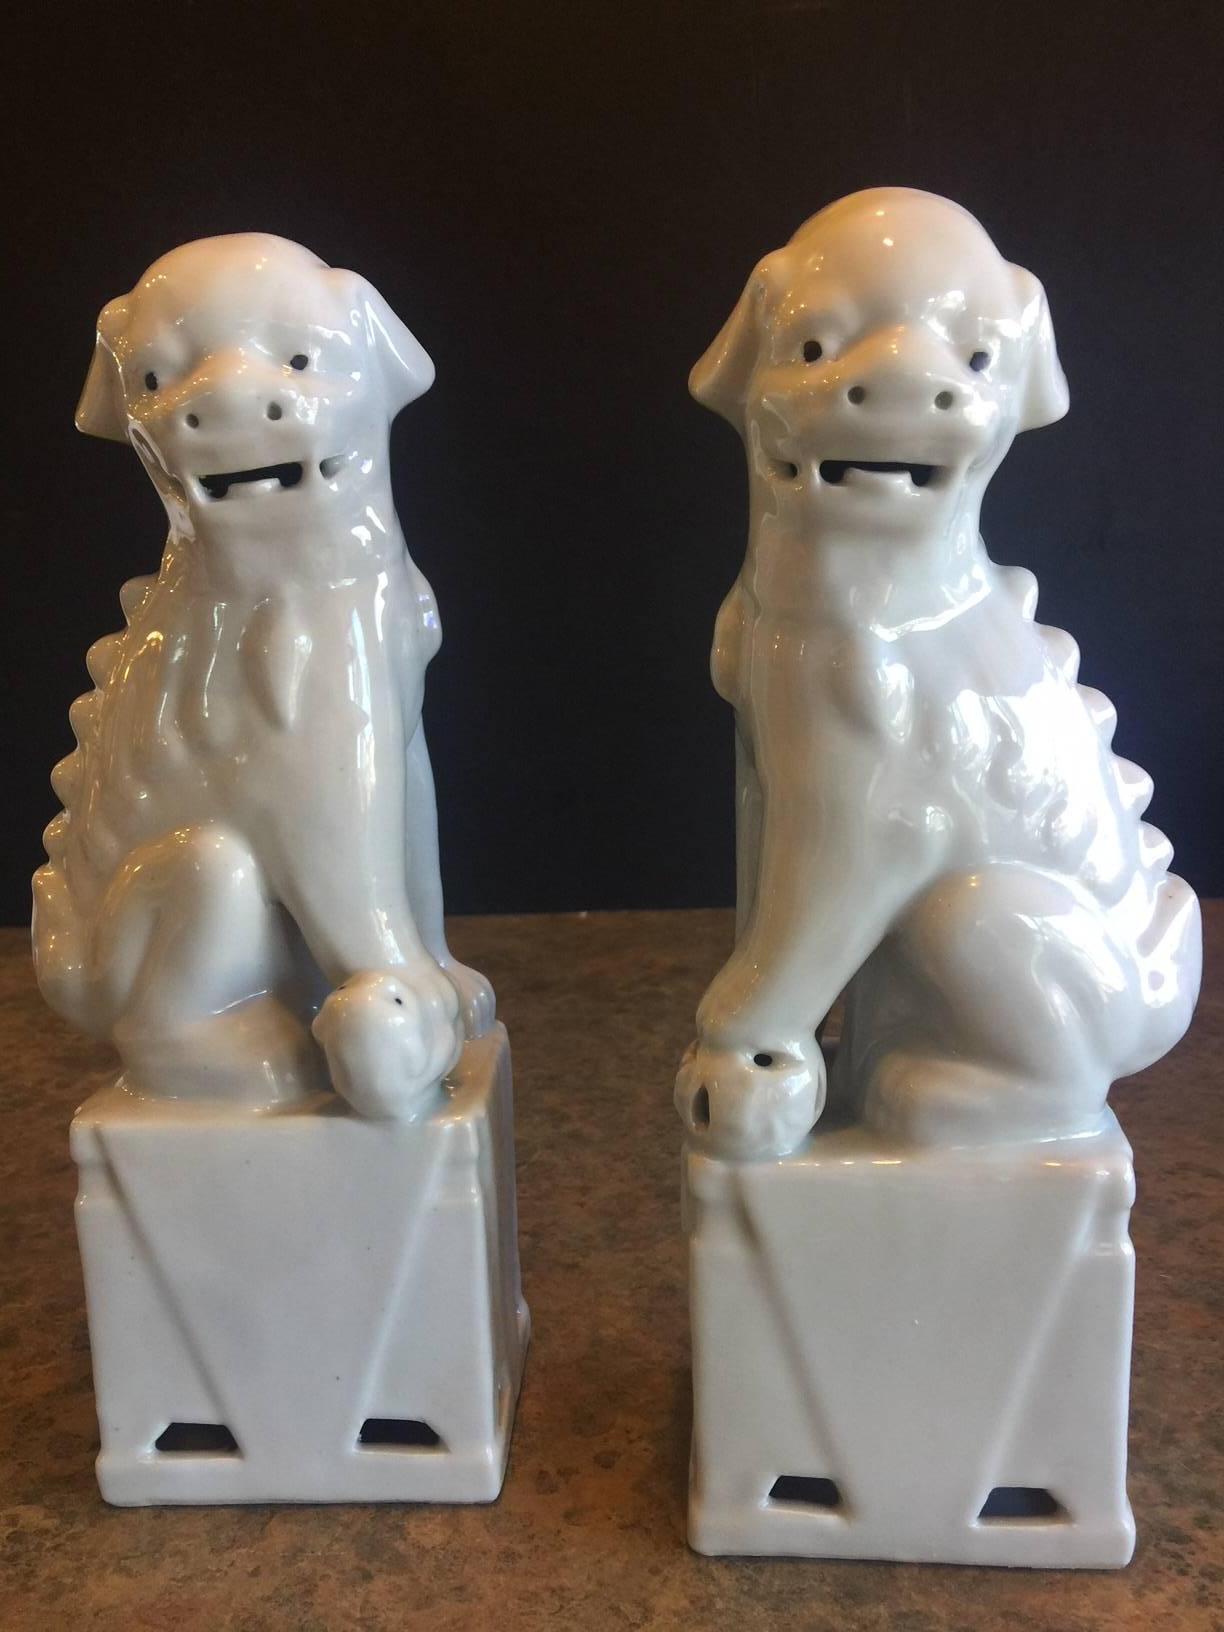 A very nice pair of vintage, white, ceramic foo dogs. Excellent condition and patina; makes a great pair of book ends or a fun decor item in any room!